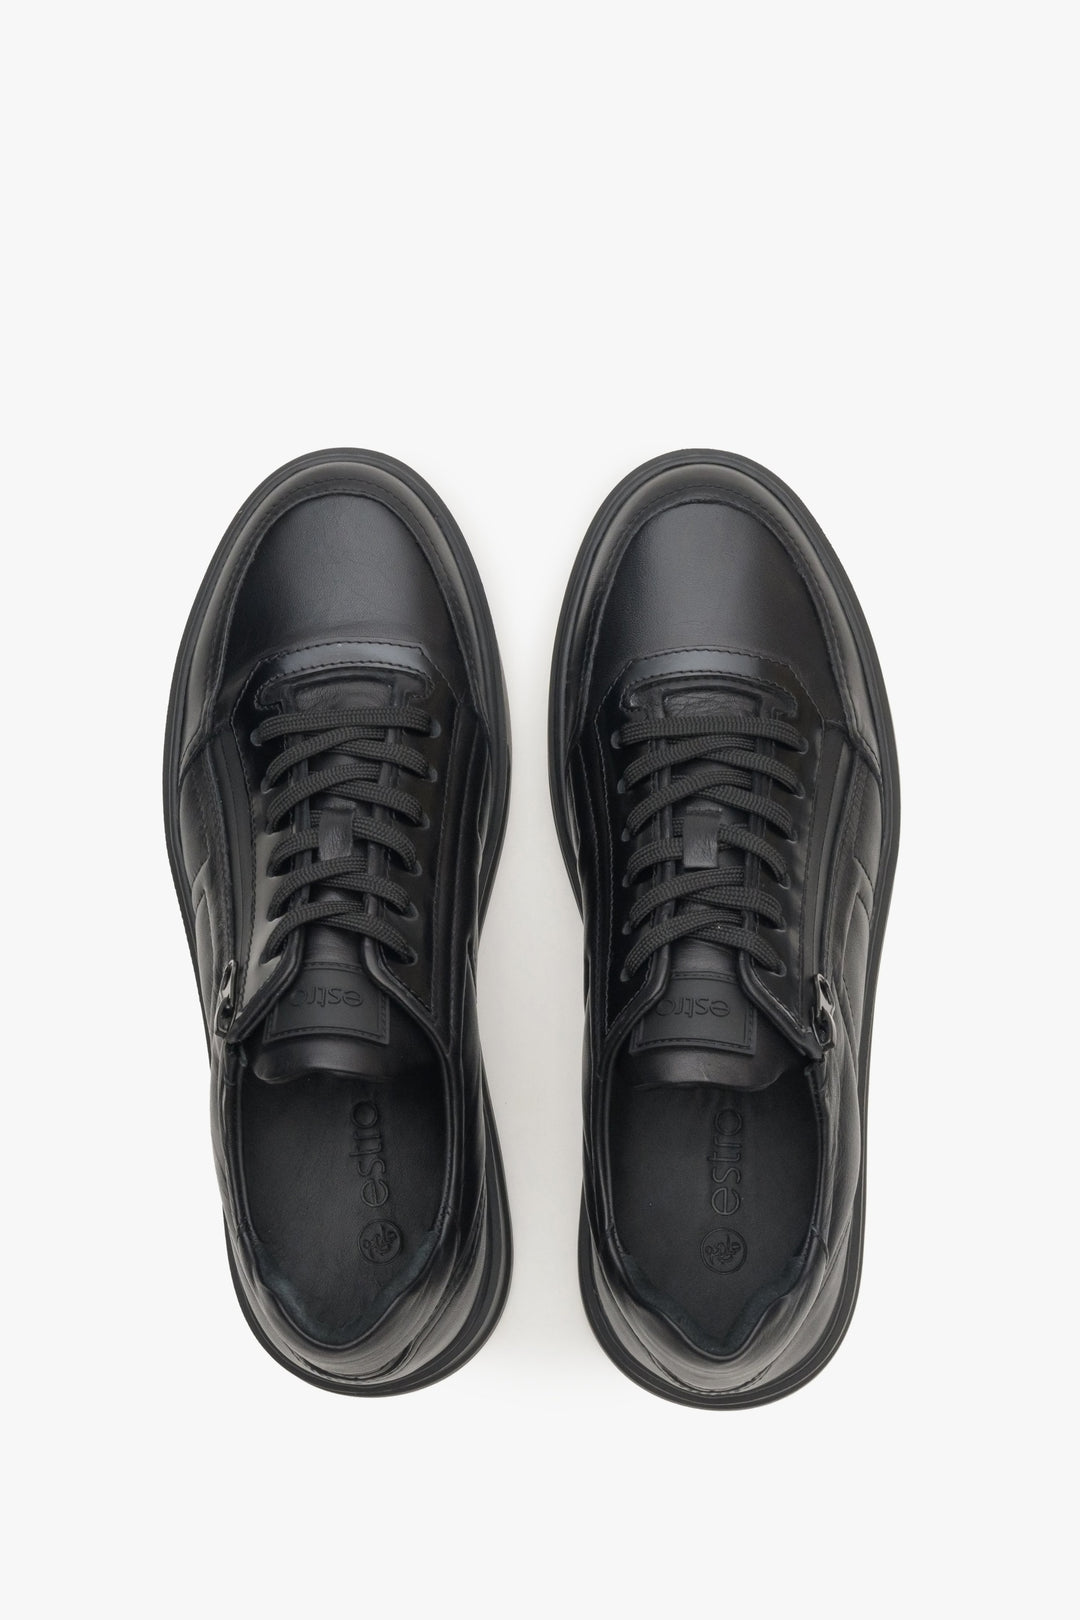 Men's black leather sneakers by Estro - top view presentation of the model.